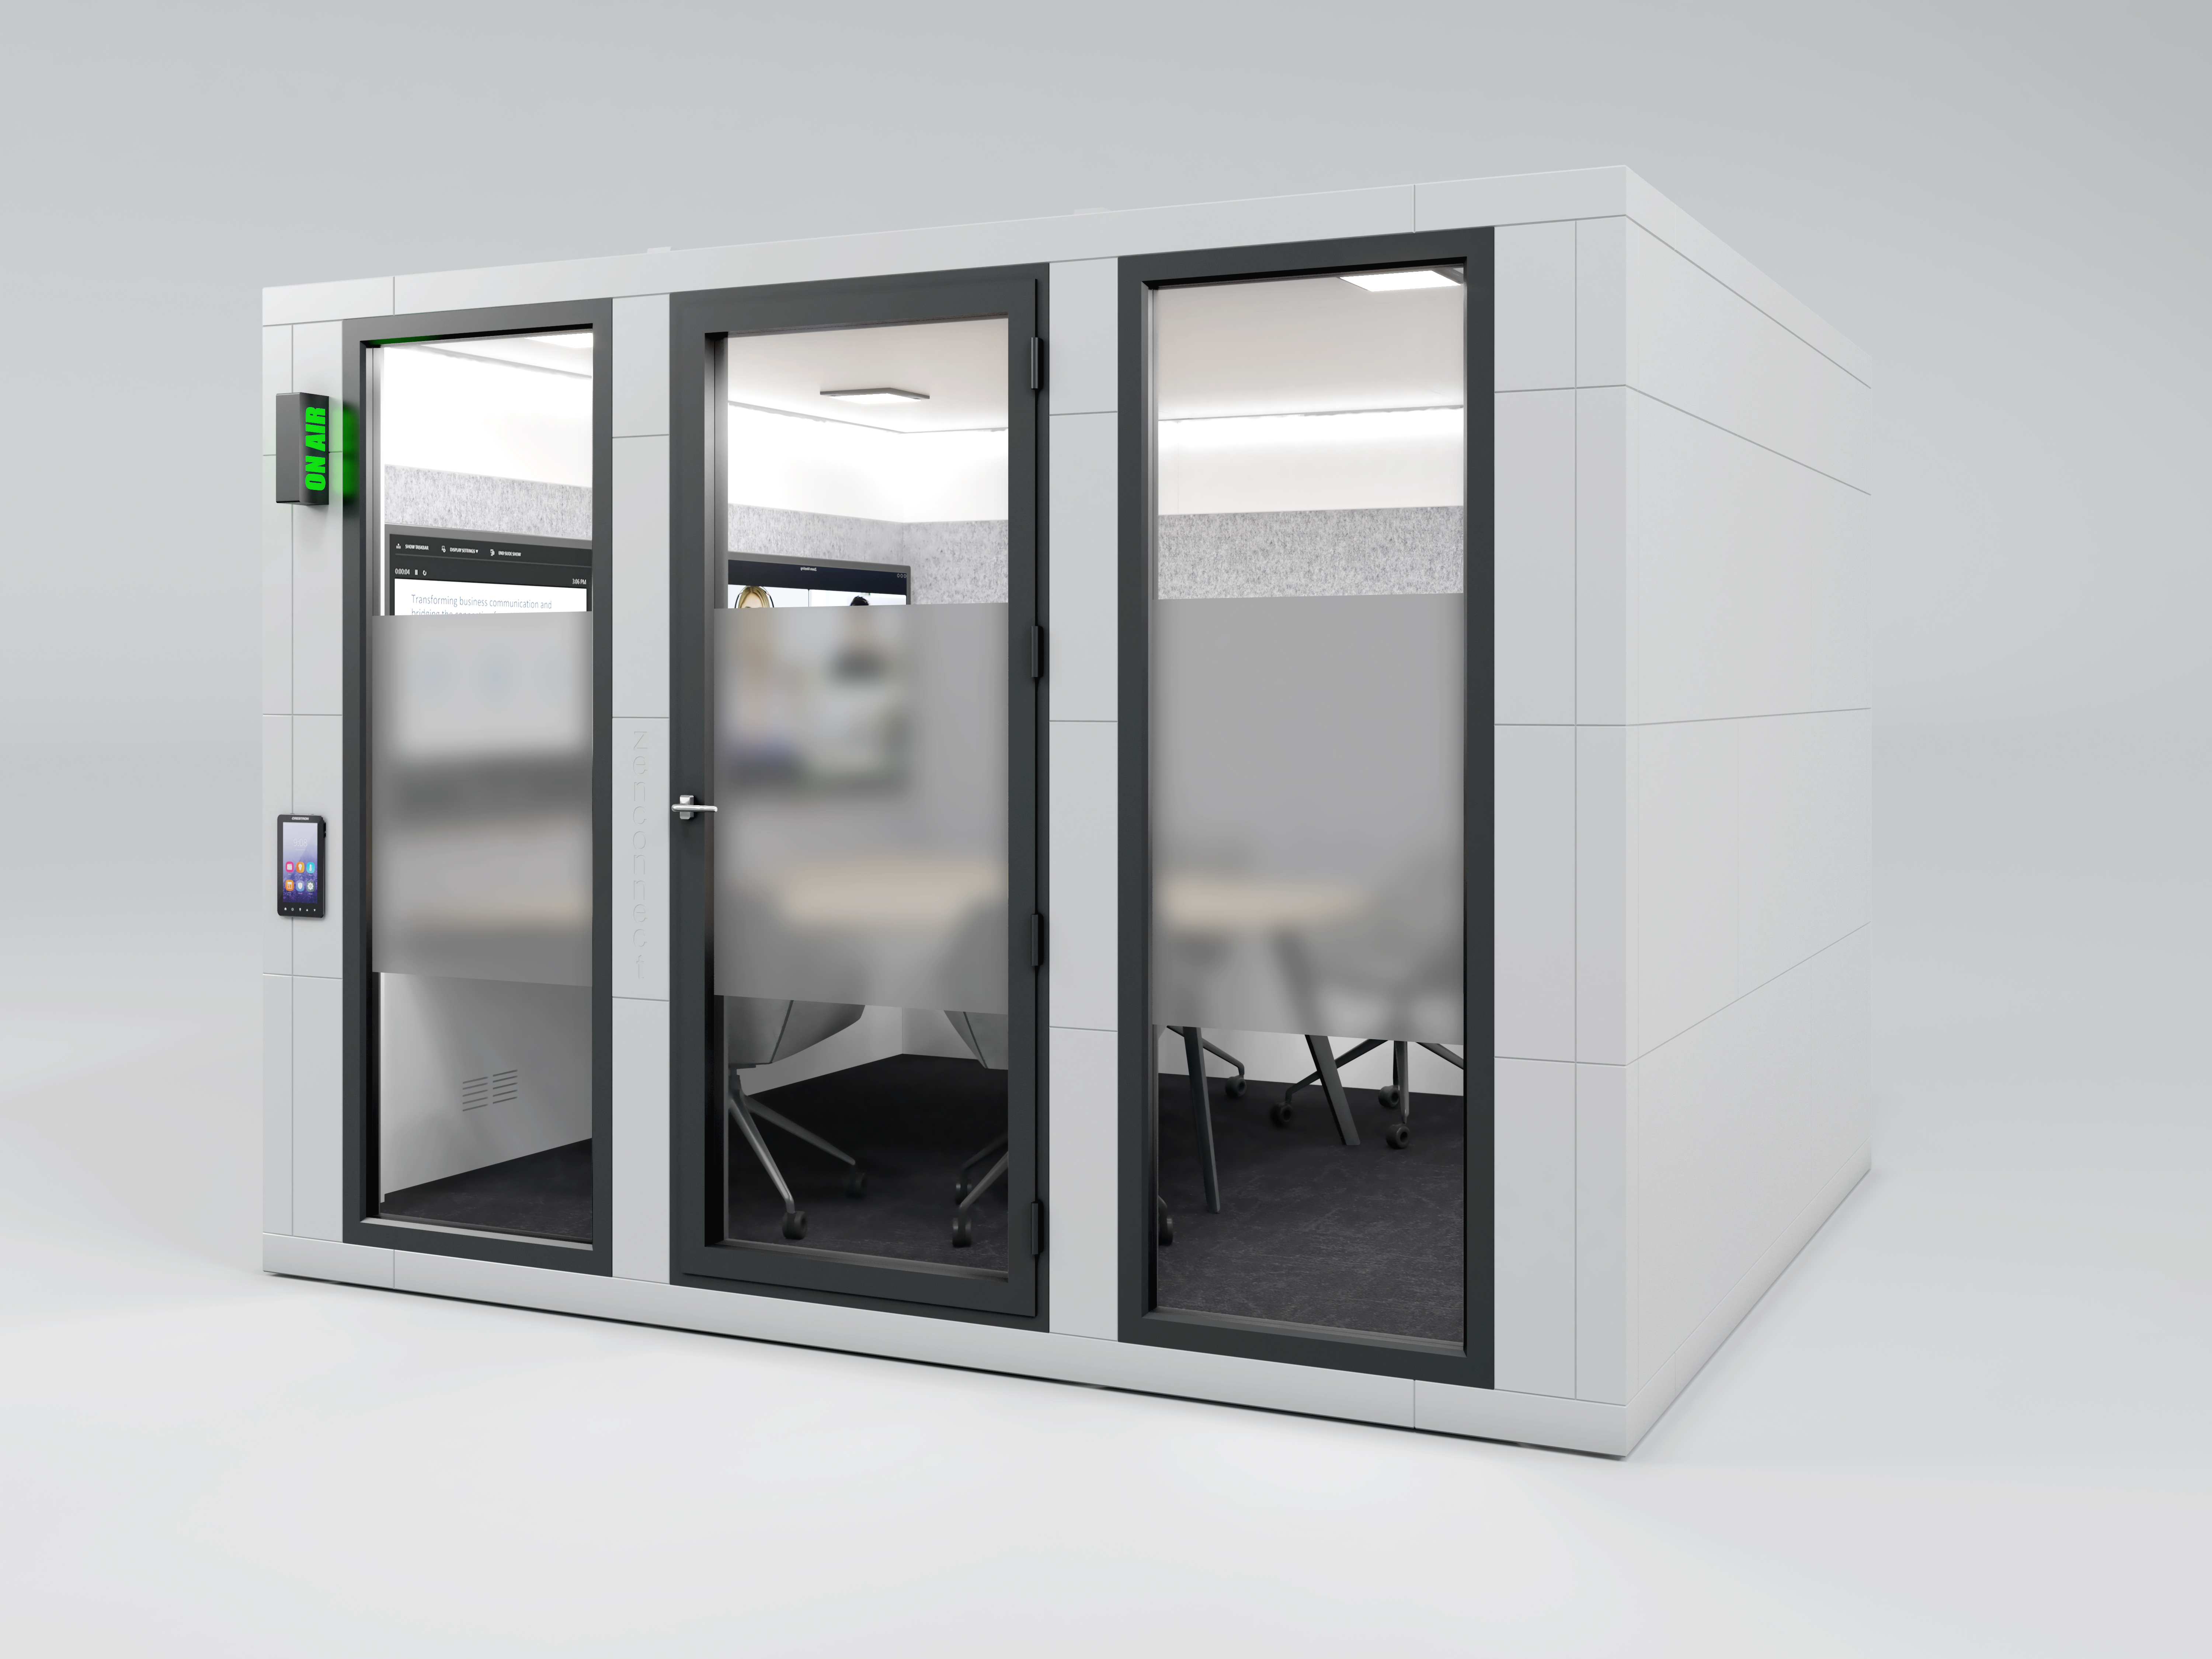 Global Shift to Hybrid Working Leads to Launch of Video Conferencing Pods by Zentura